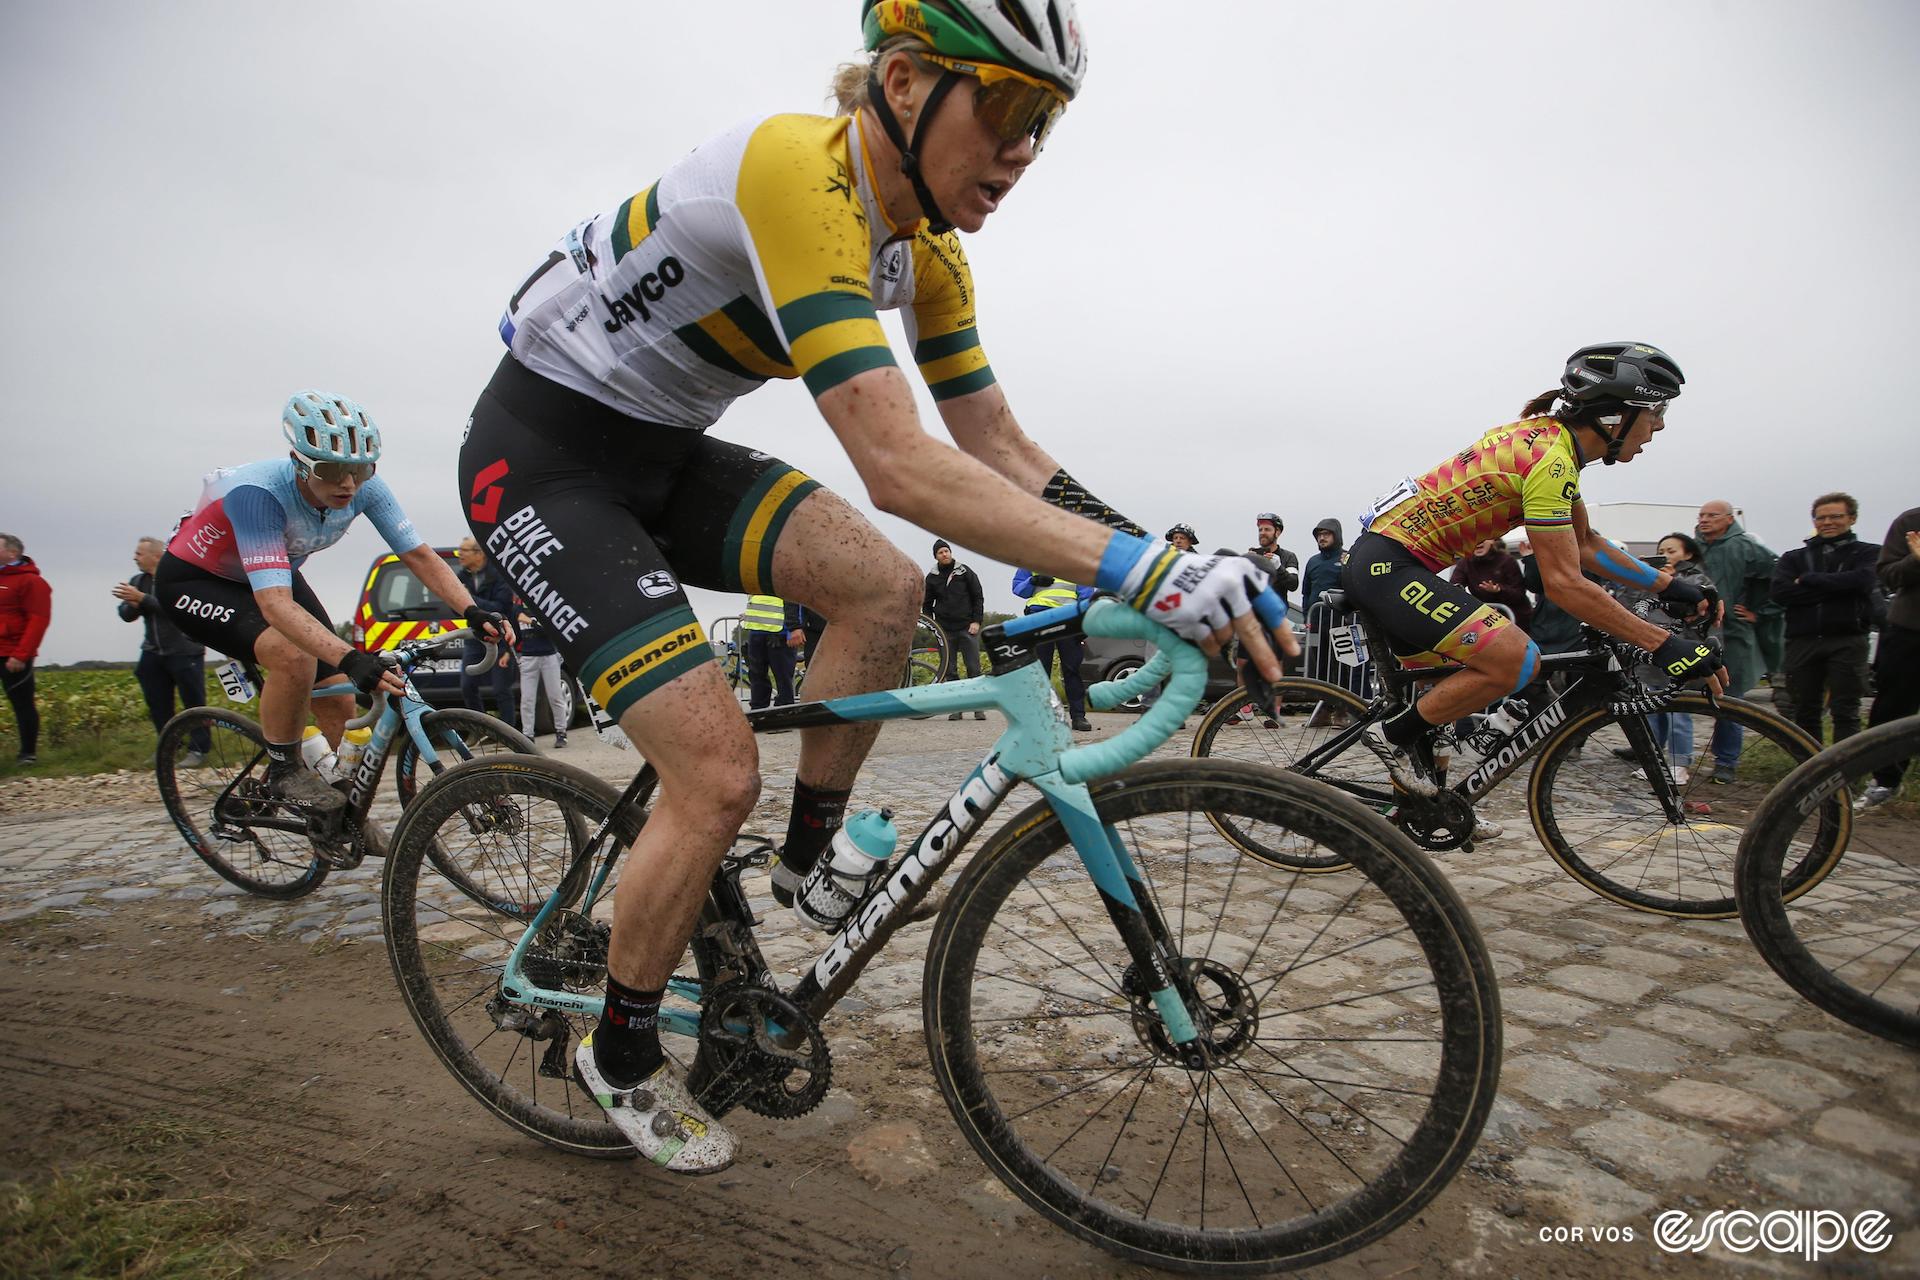 Sarah Roy in the green and gold of Australian road champion rides her Bianchi road bike in the mud beside some cobblestones at Paris-Roubaix.